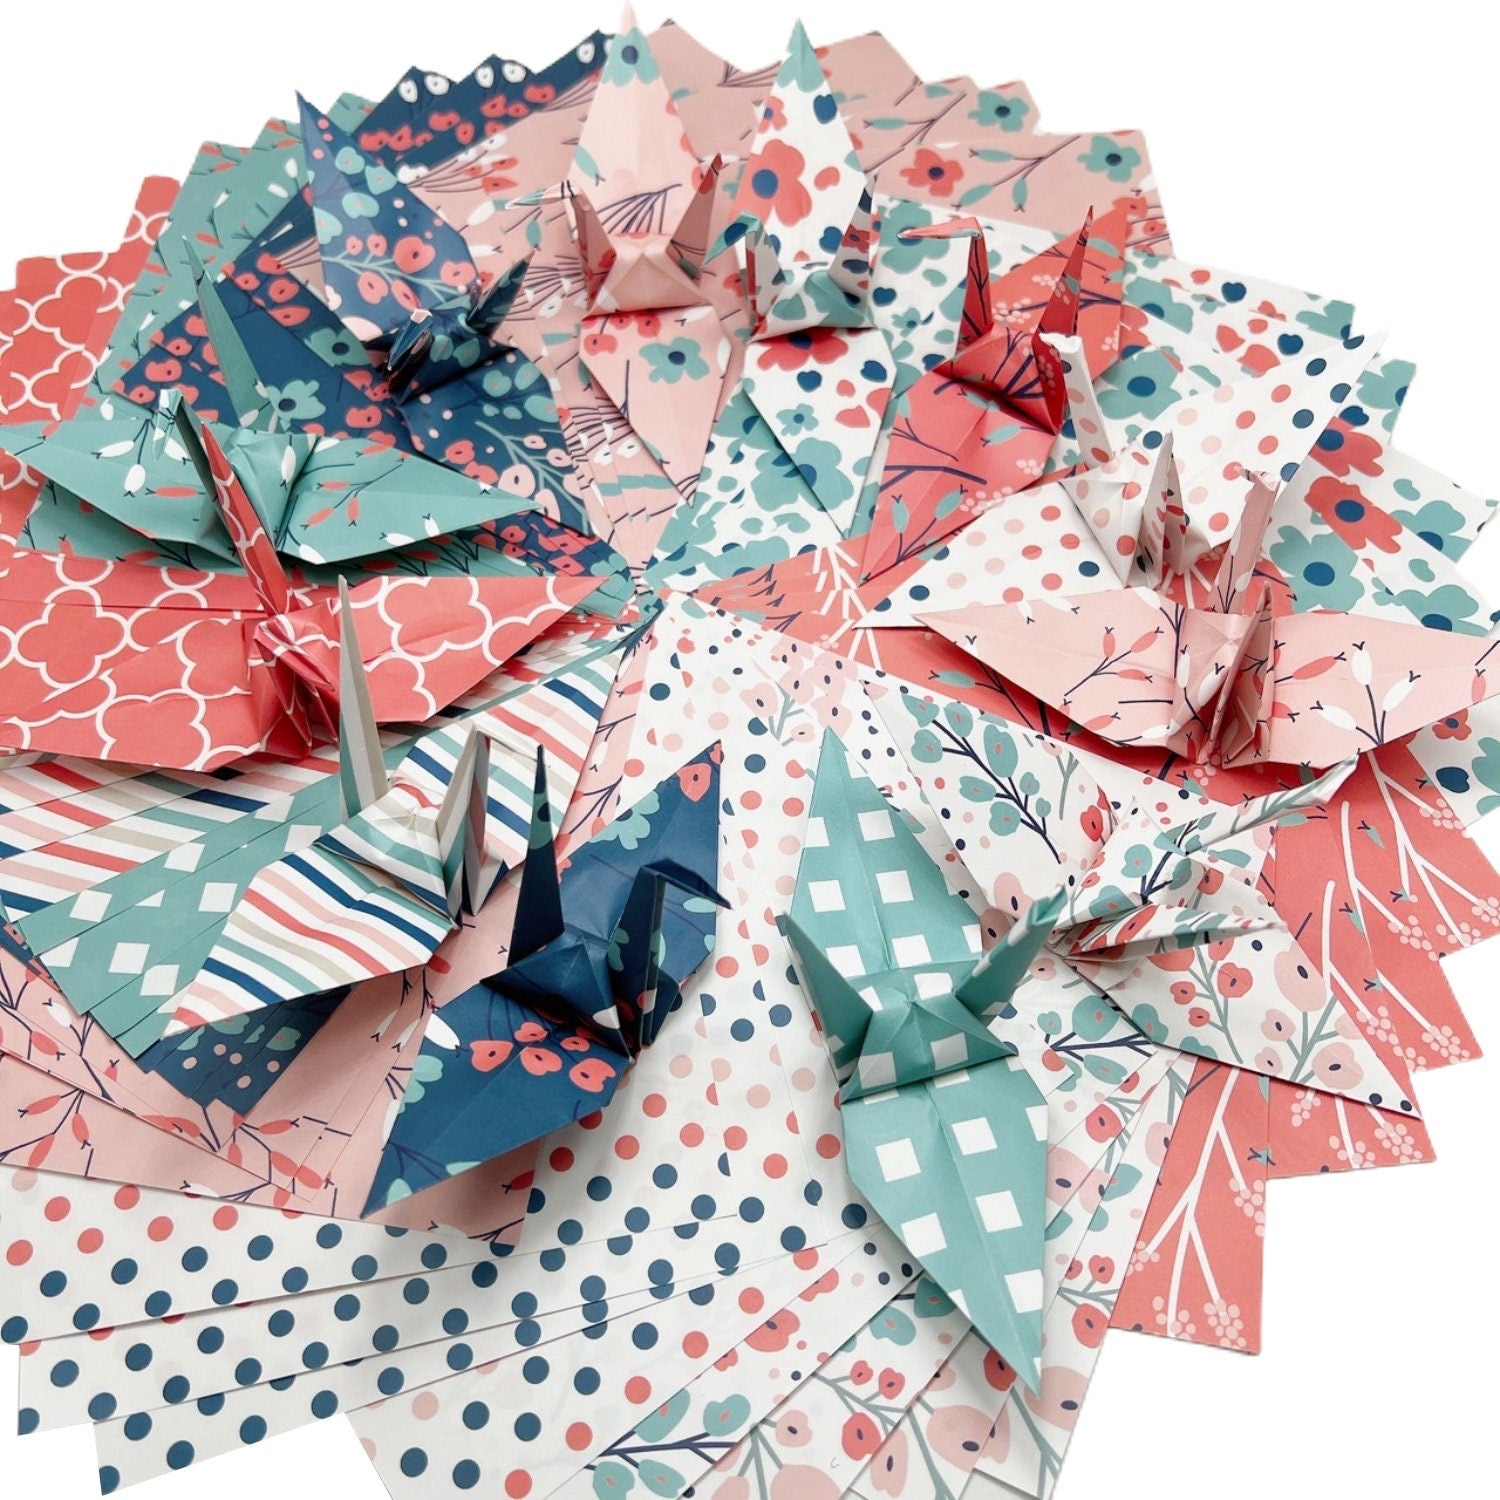 50 Patterned Origami Paper Sheets 6x6 inches Single Sided for Paper Art, Folding, Origami Cranes, Scrapbooking - Floral Desig